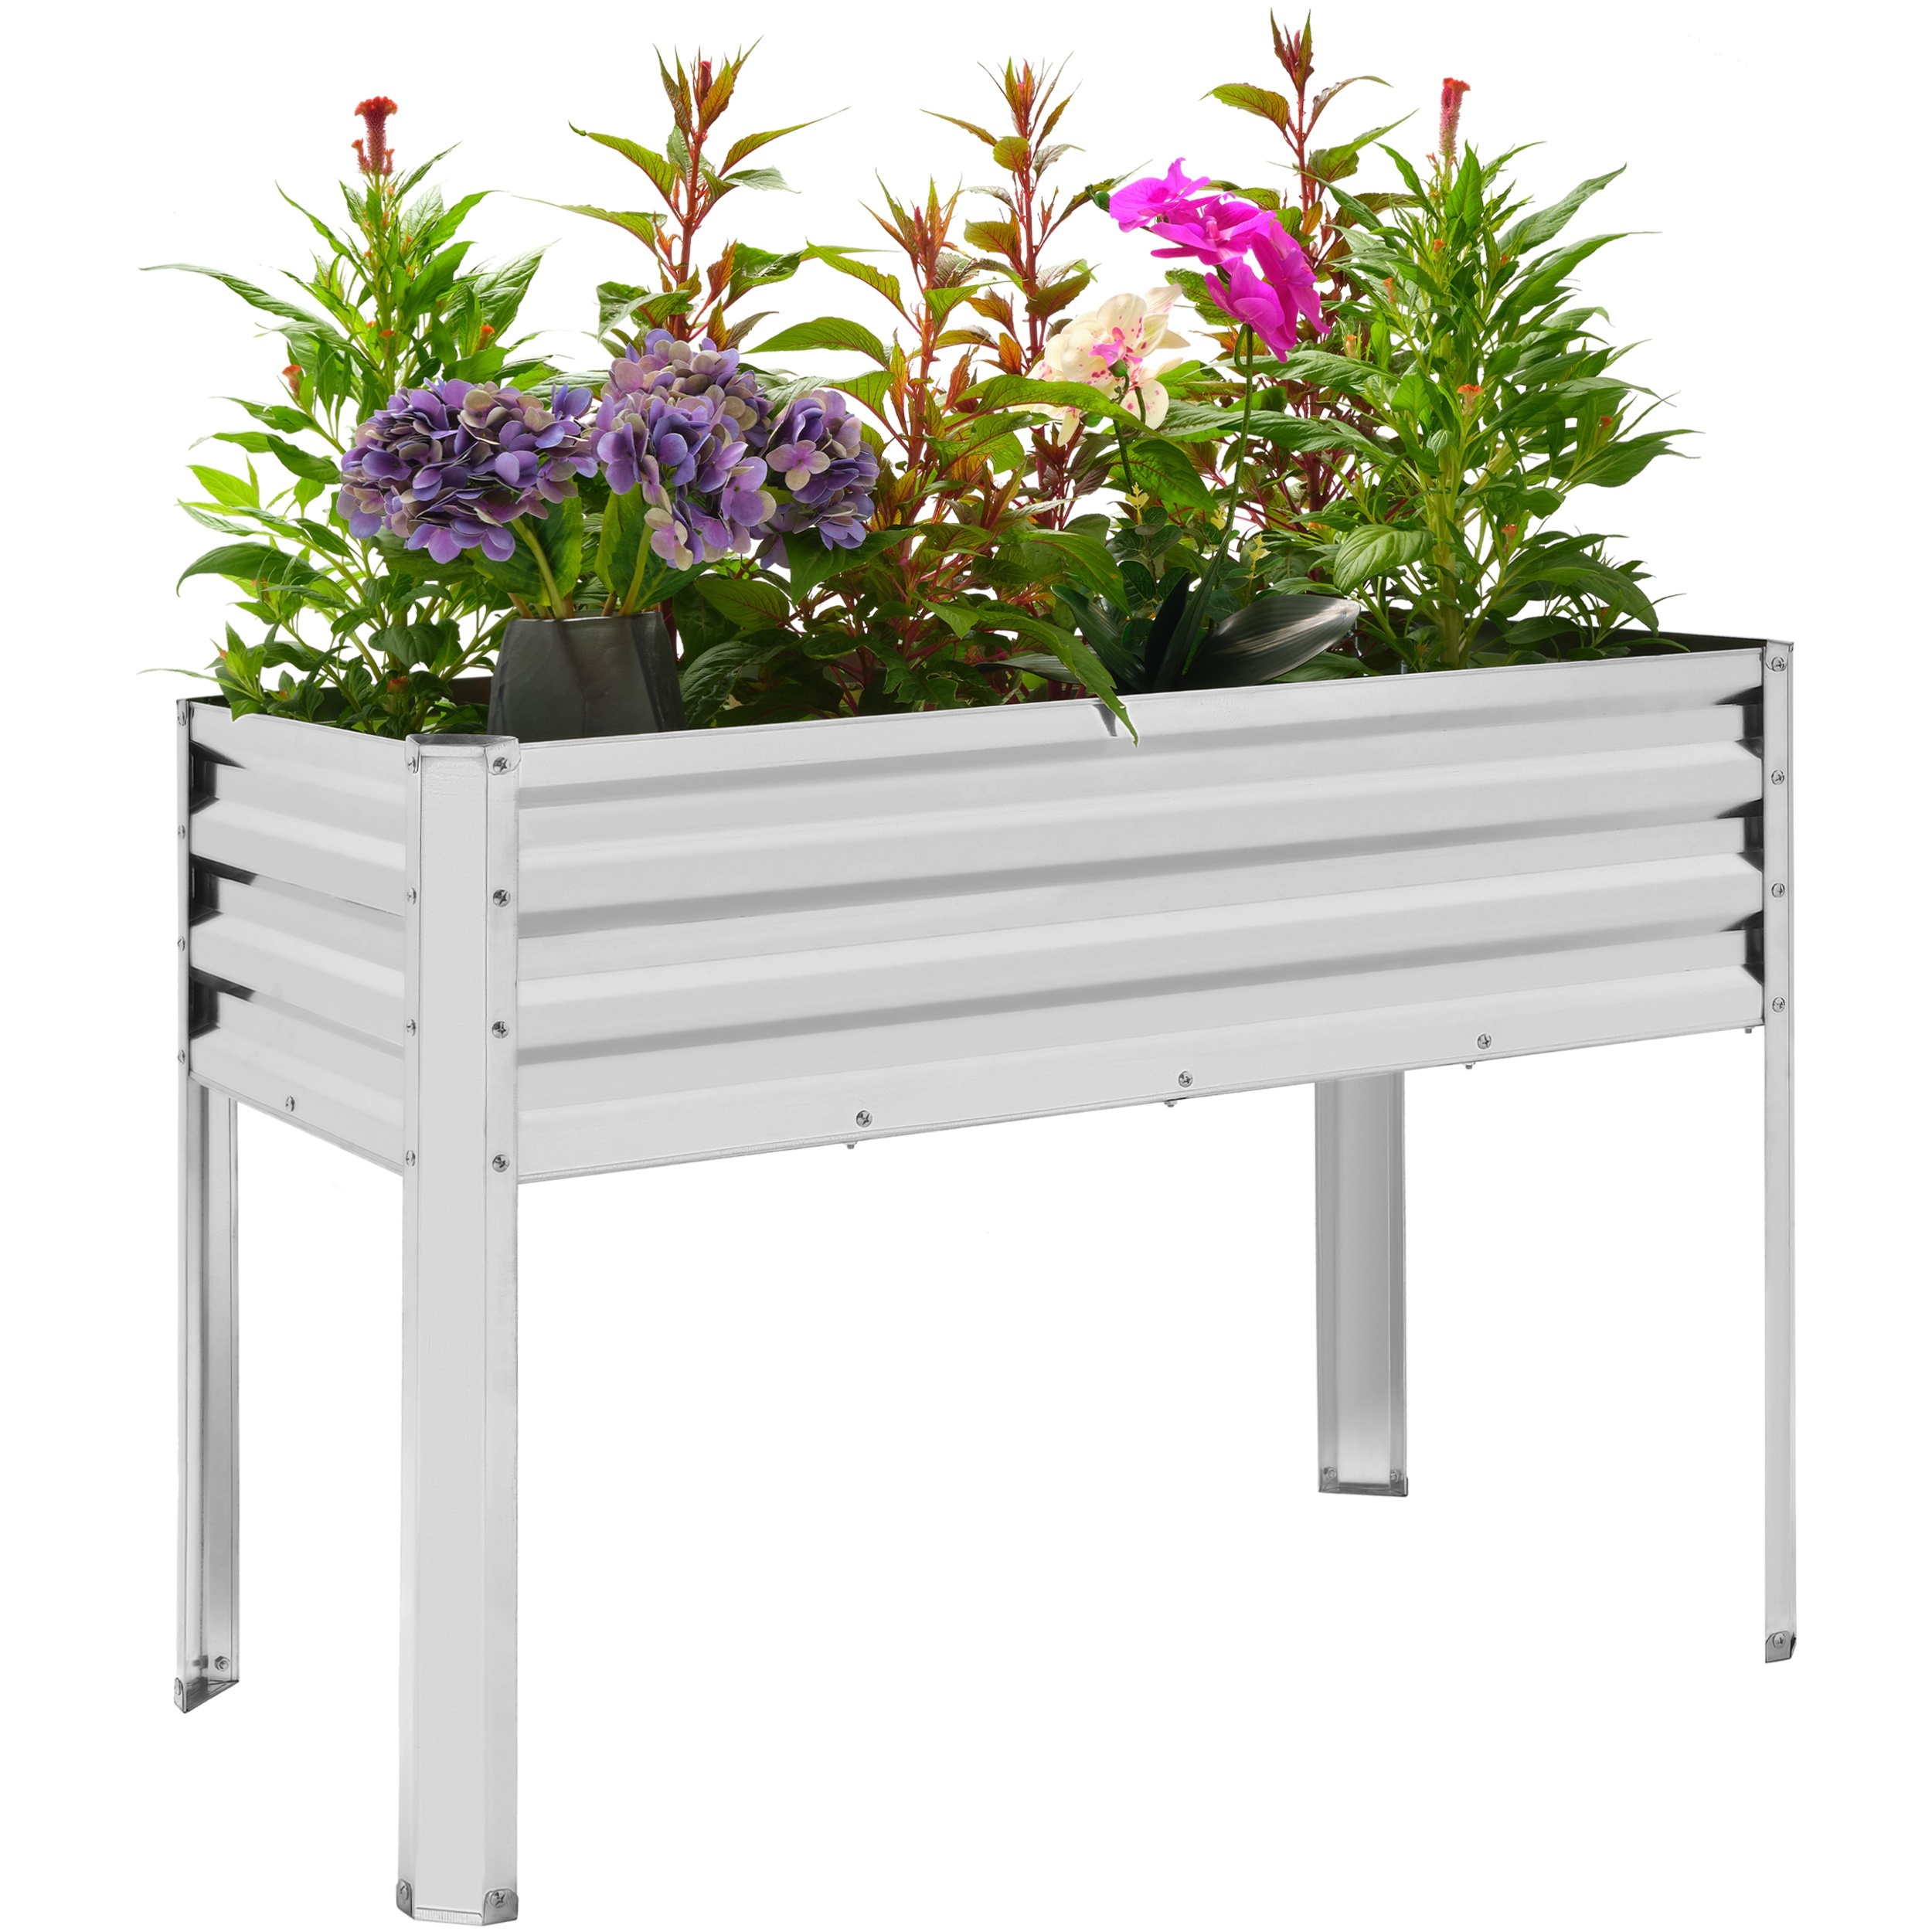 

Galvanized Raised Garden Bed Outdoor - 48 X 24 X 32 In Raised Garden Bed With Legs For Vegetables Flowers Herbs, Metal Elevated Raised Planter Box For Backyard, Balcony, Patio, Silver